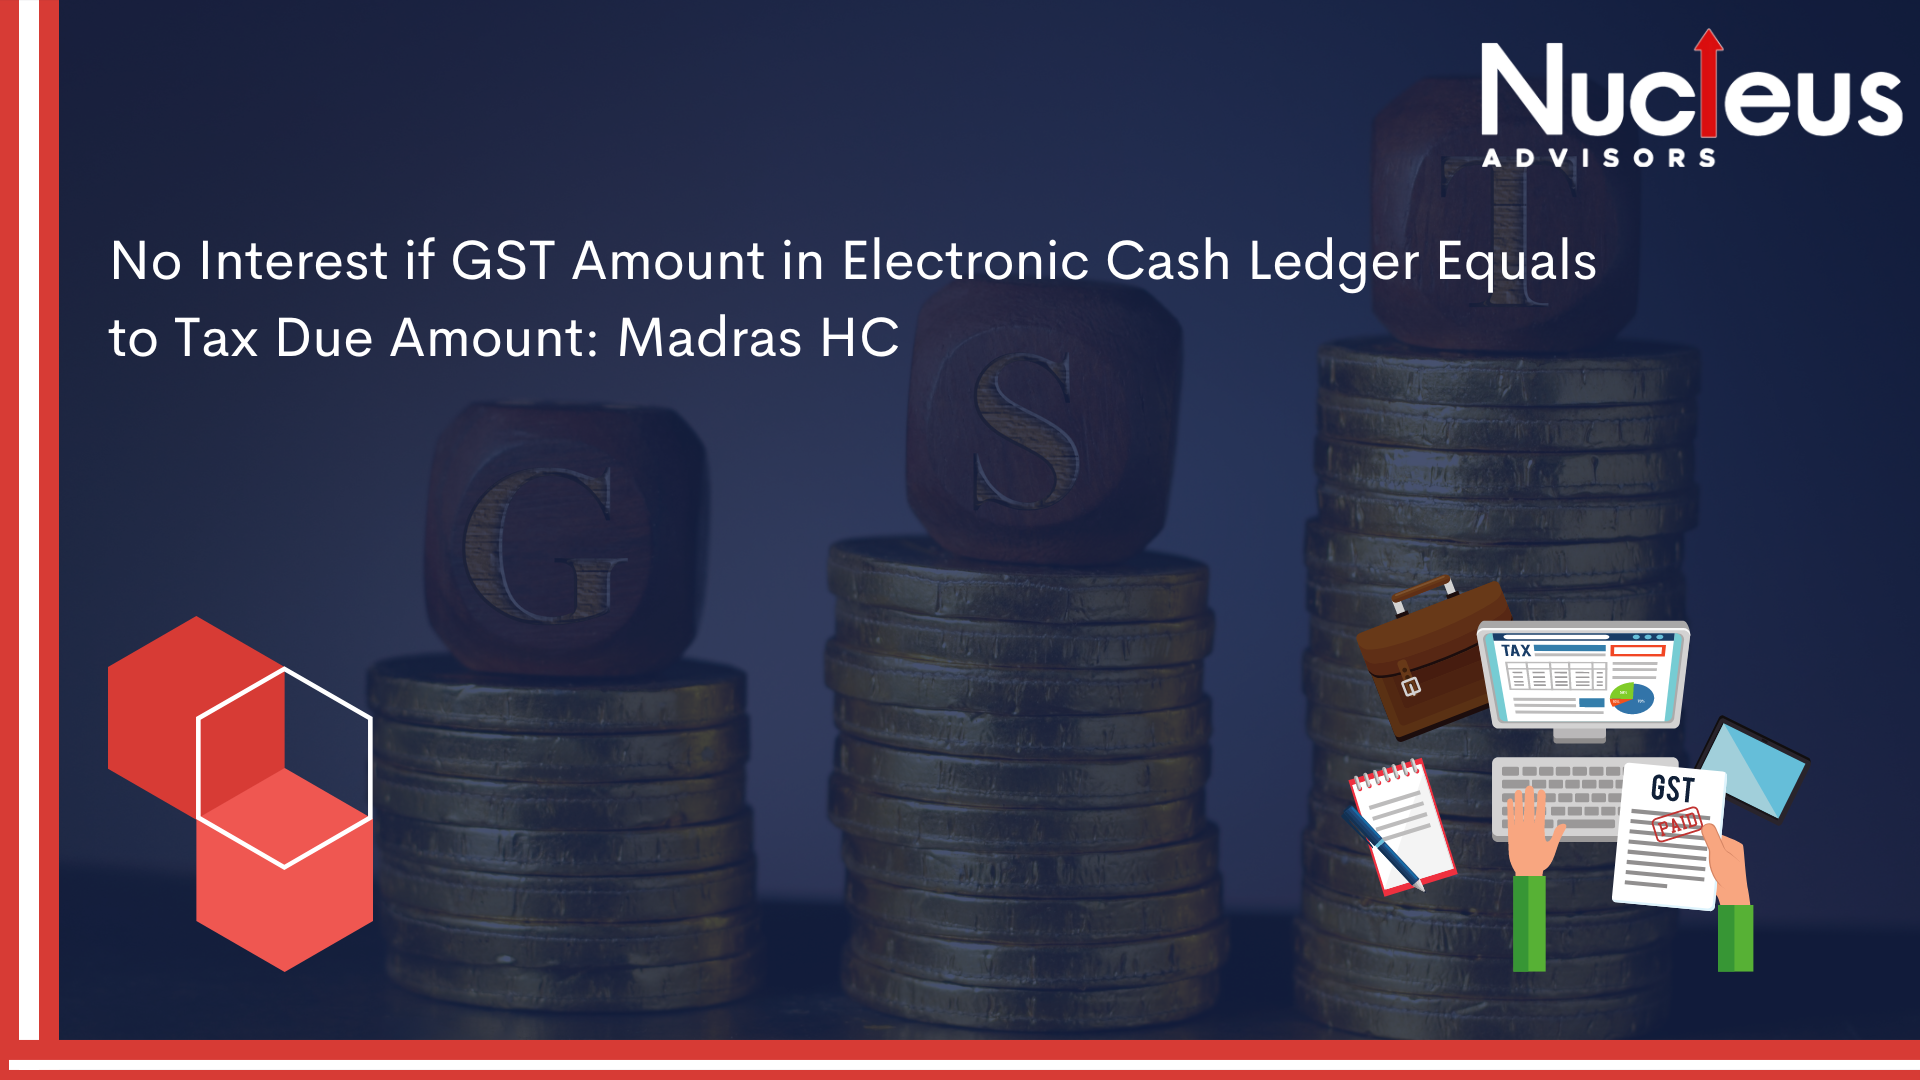 No Interest if GST Amount in Electronic Cash Ledger Equals to Tax Due Amount: Madras HC